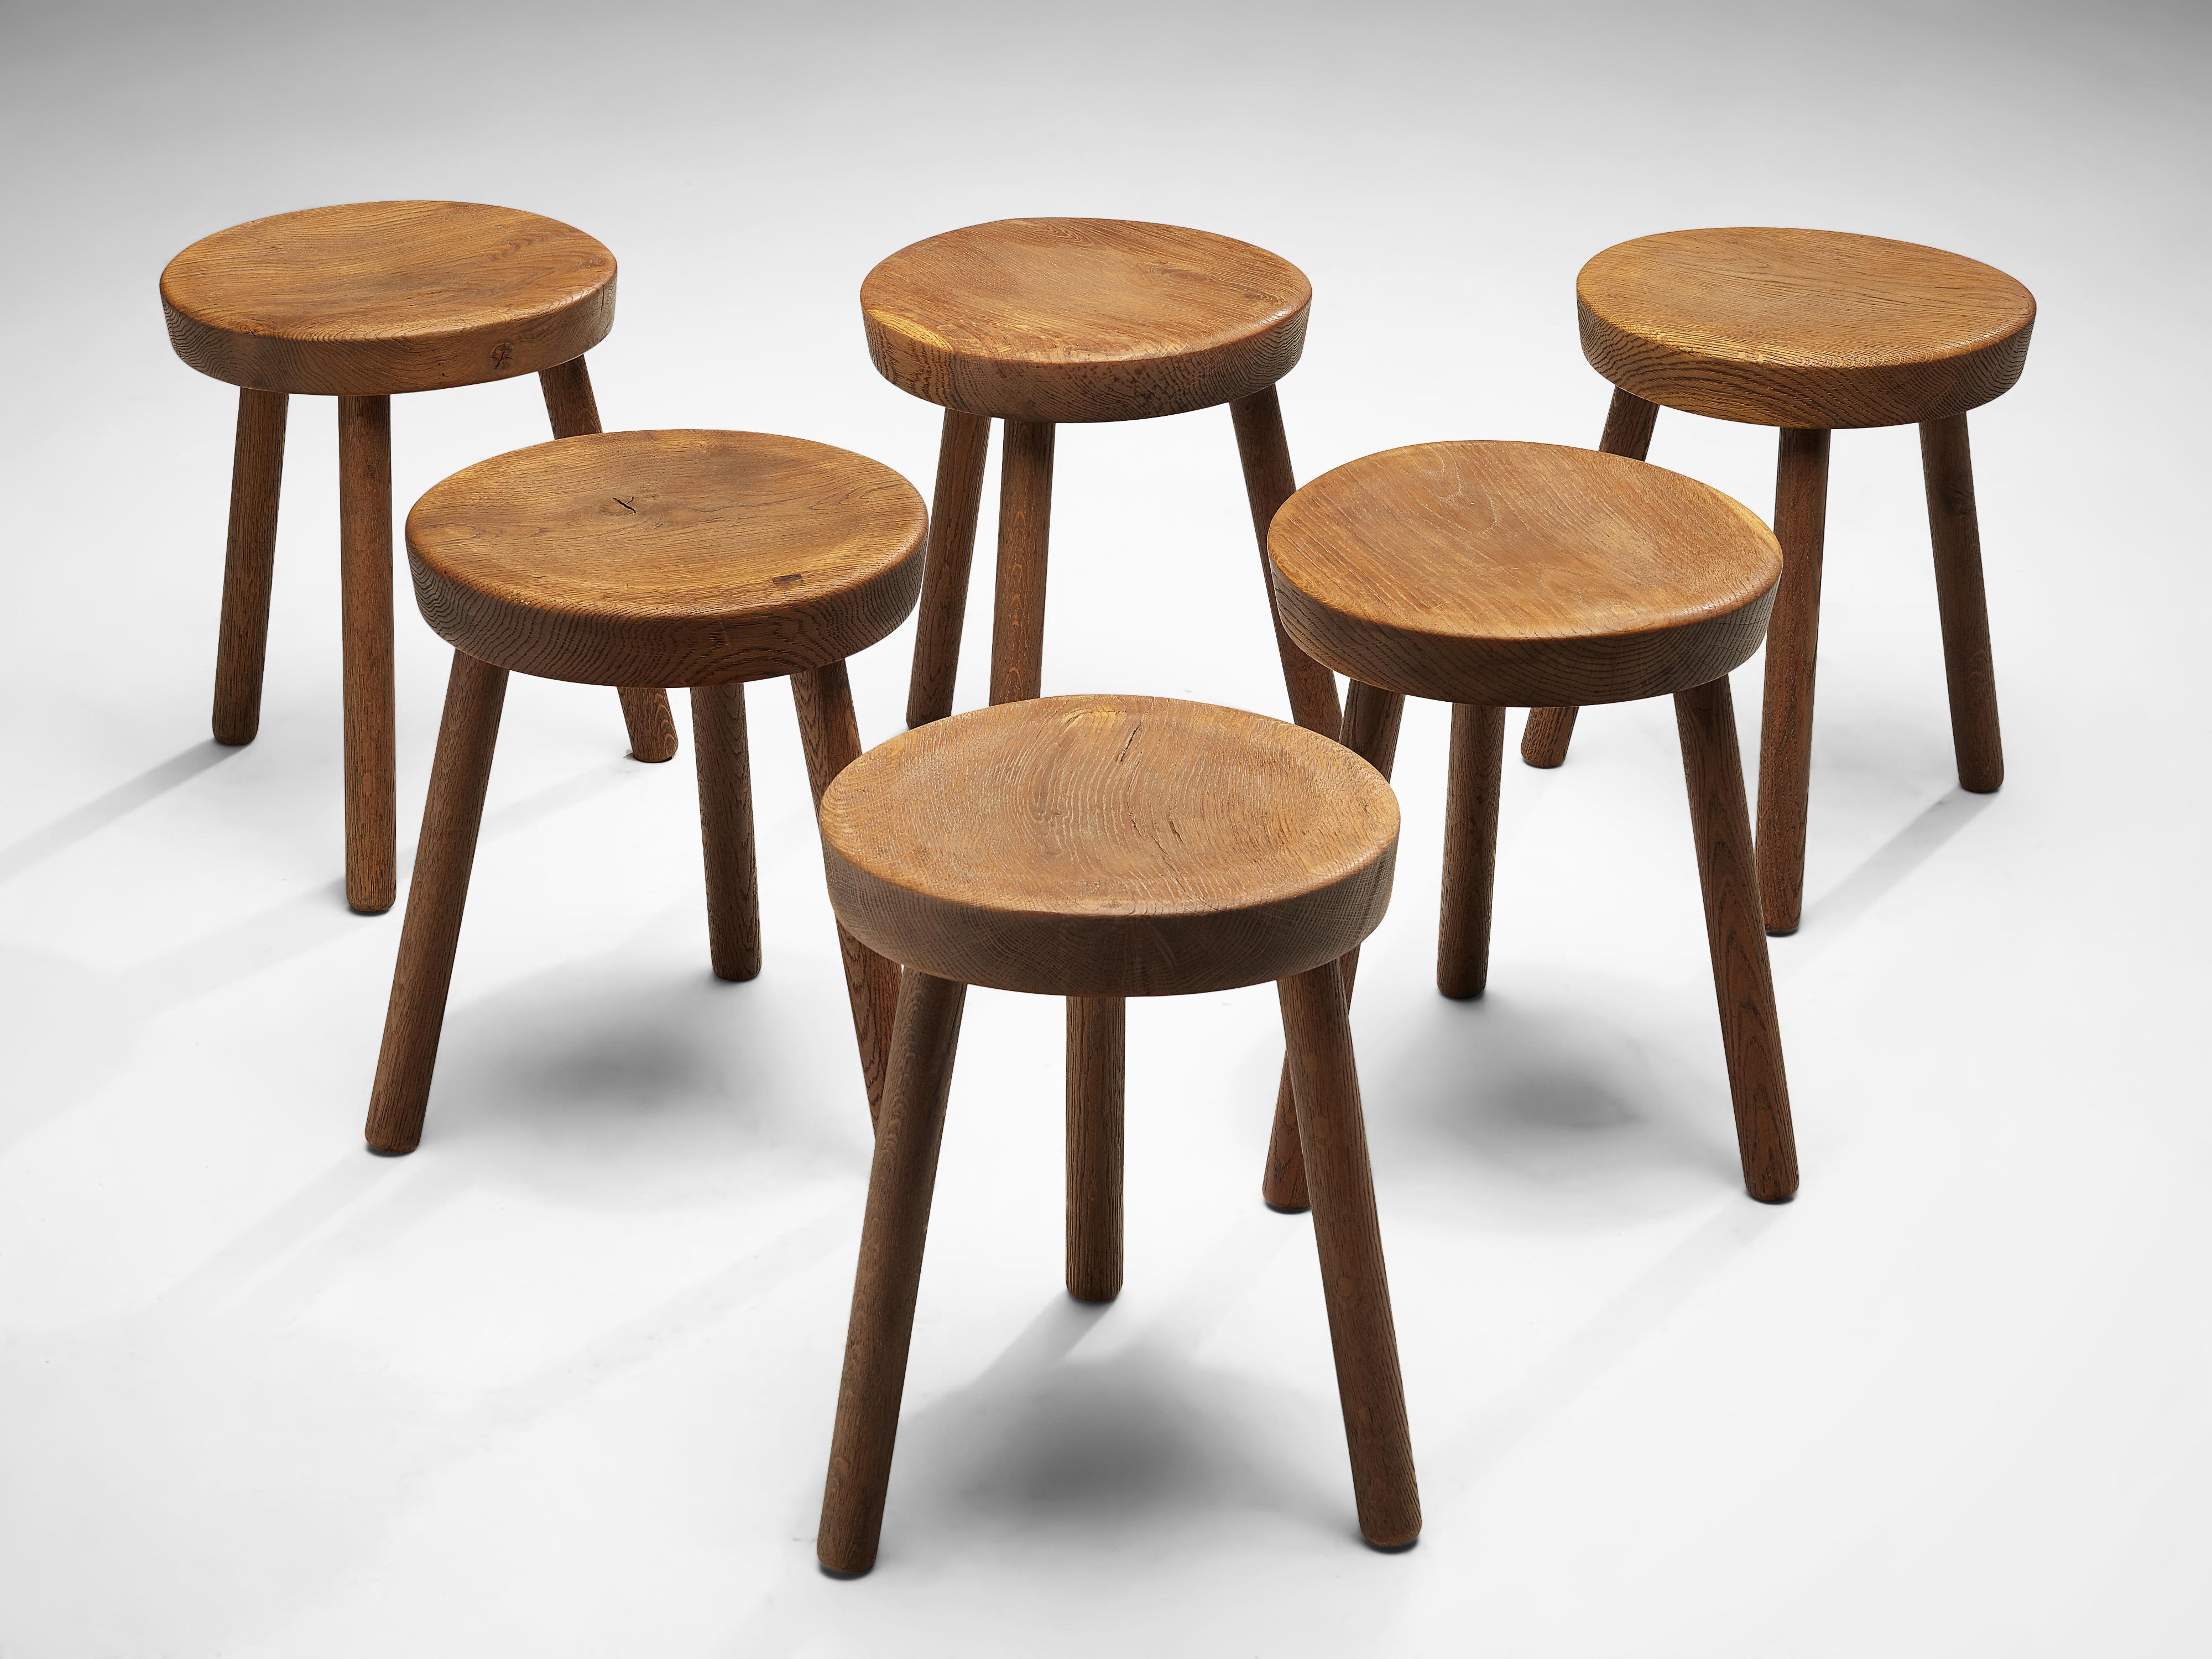 Tripod stools or side tables, solid oak, Switzerland, 1960s-1970s.

Beautiful crafted oak stools originating from the exhibition center in St. Gallen, Switzerland. The seat is handcrafted to have a small dip for better comfort. With their simple yet